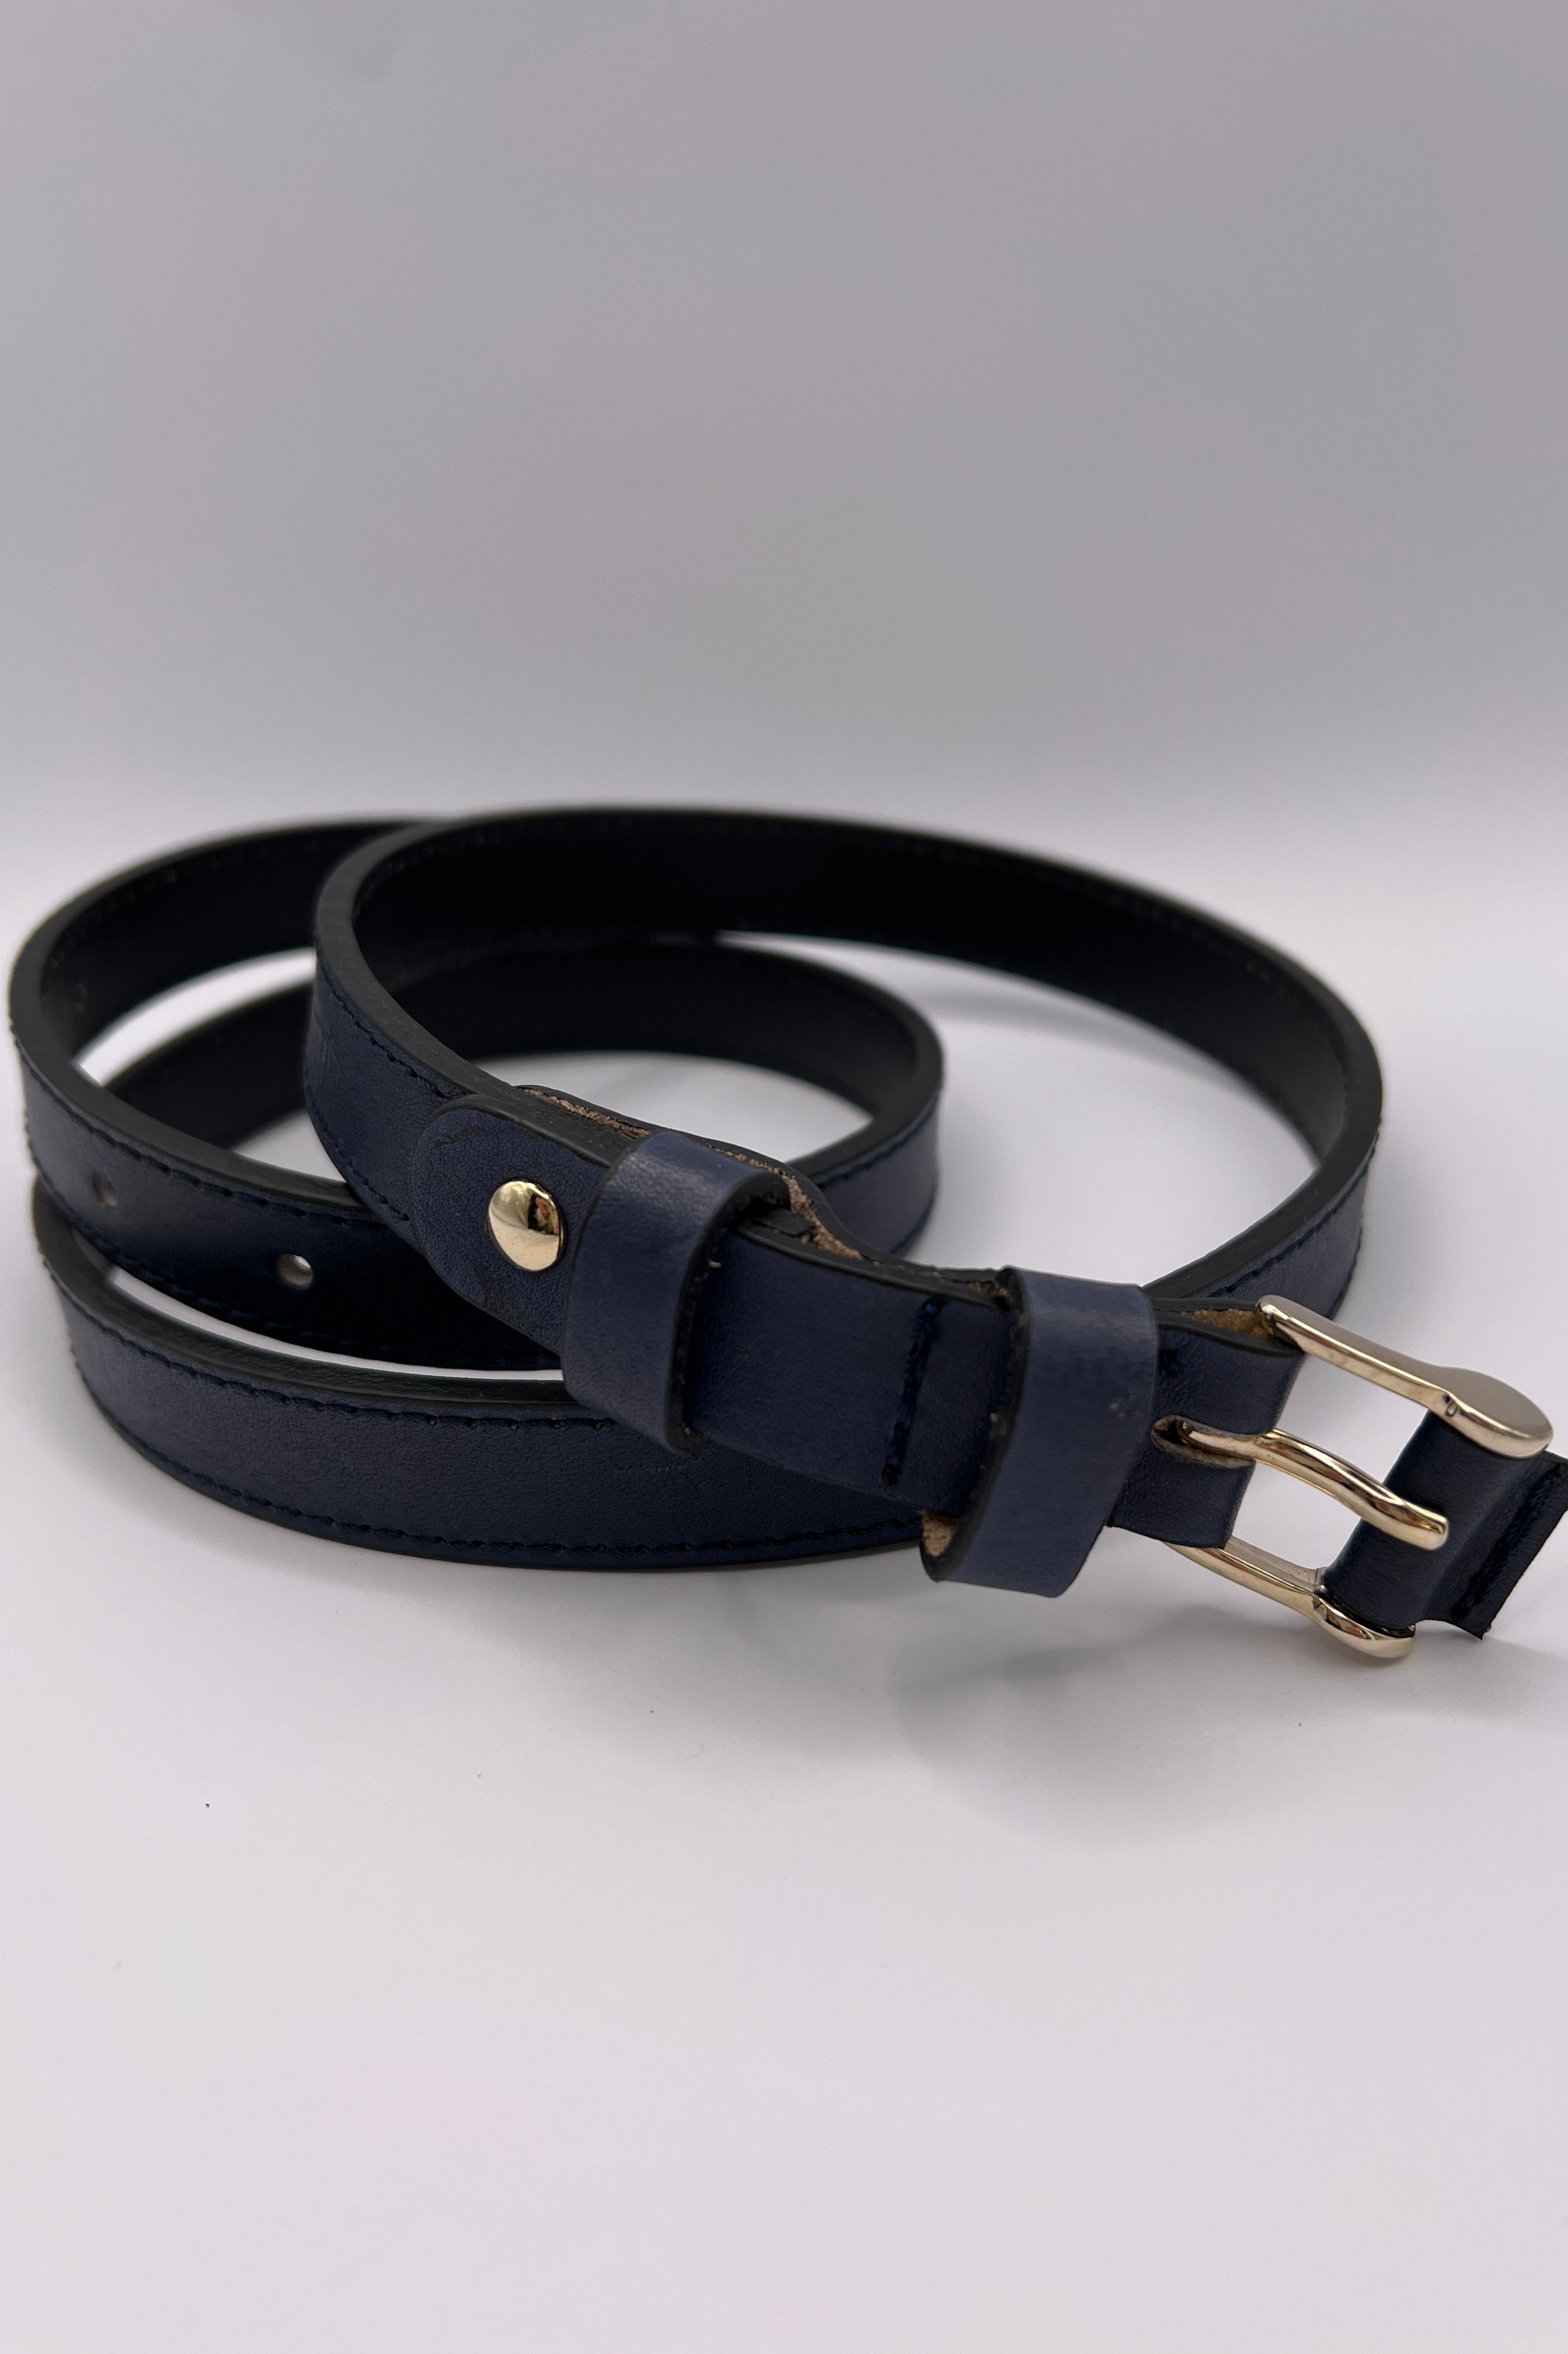 Blondish Stylish Double Loop Blue Belt with Gold Adornment for Women BLONDISH